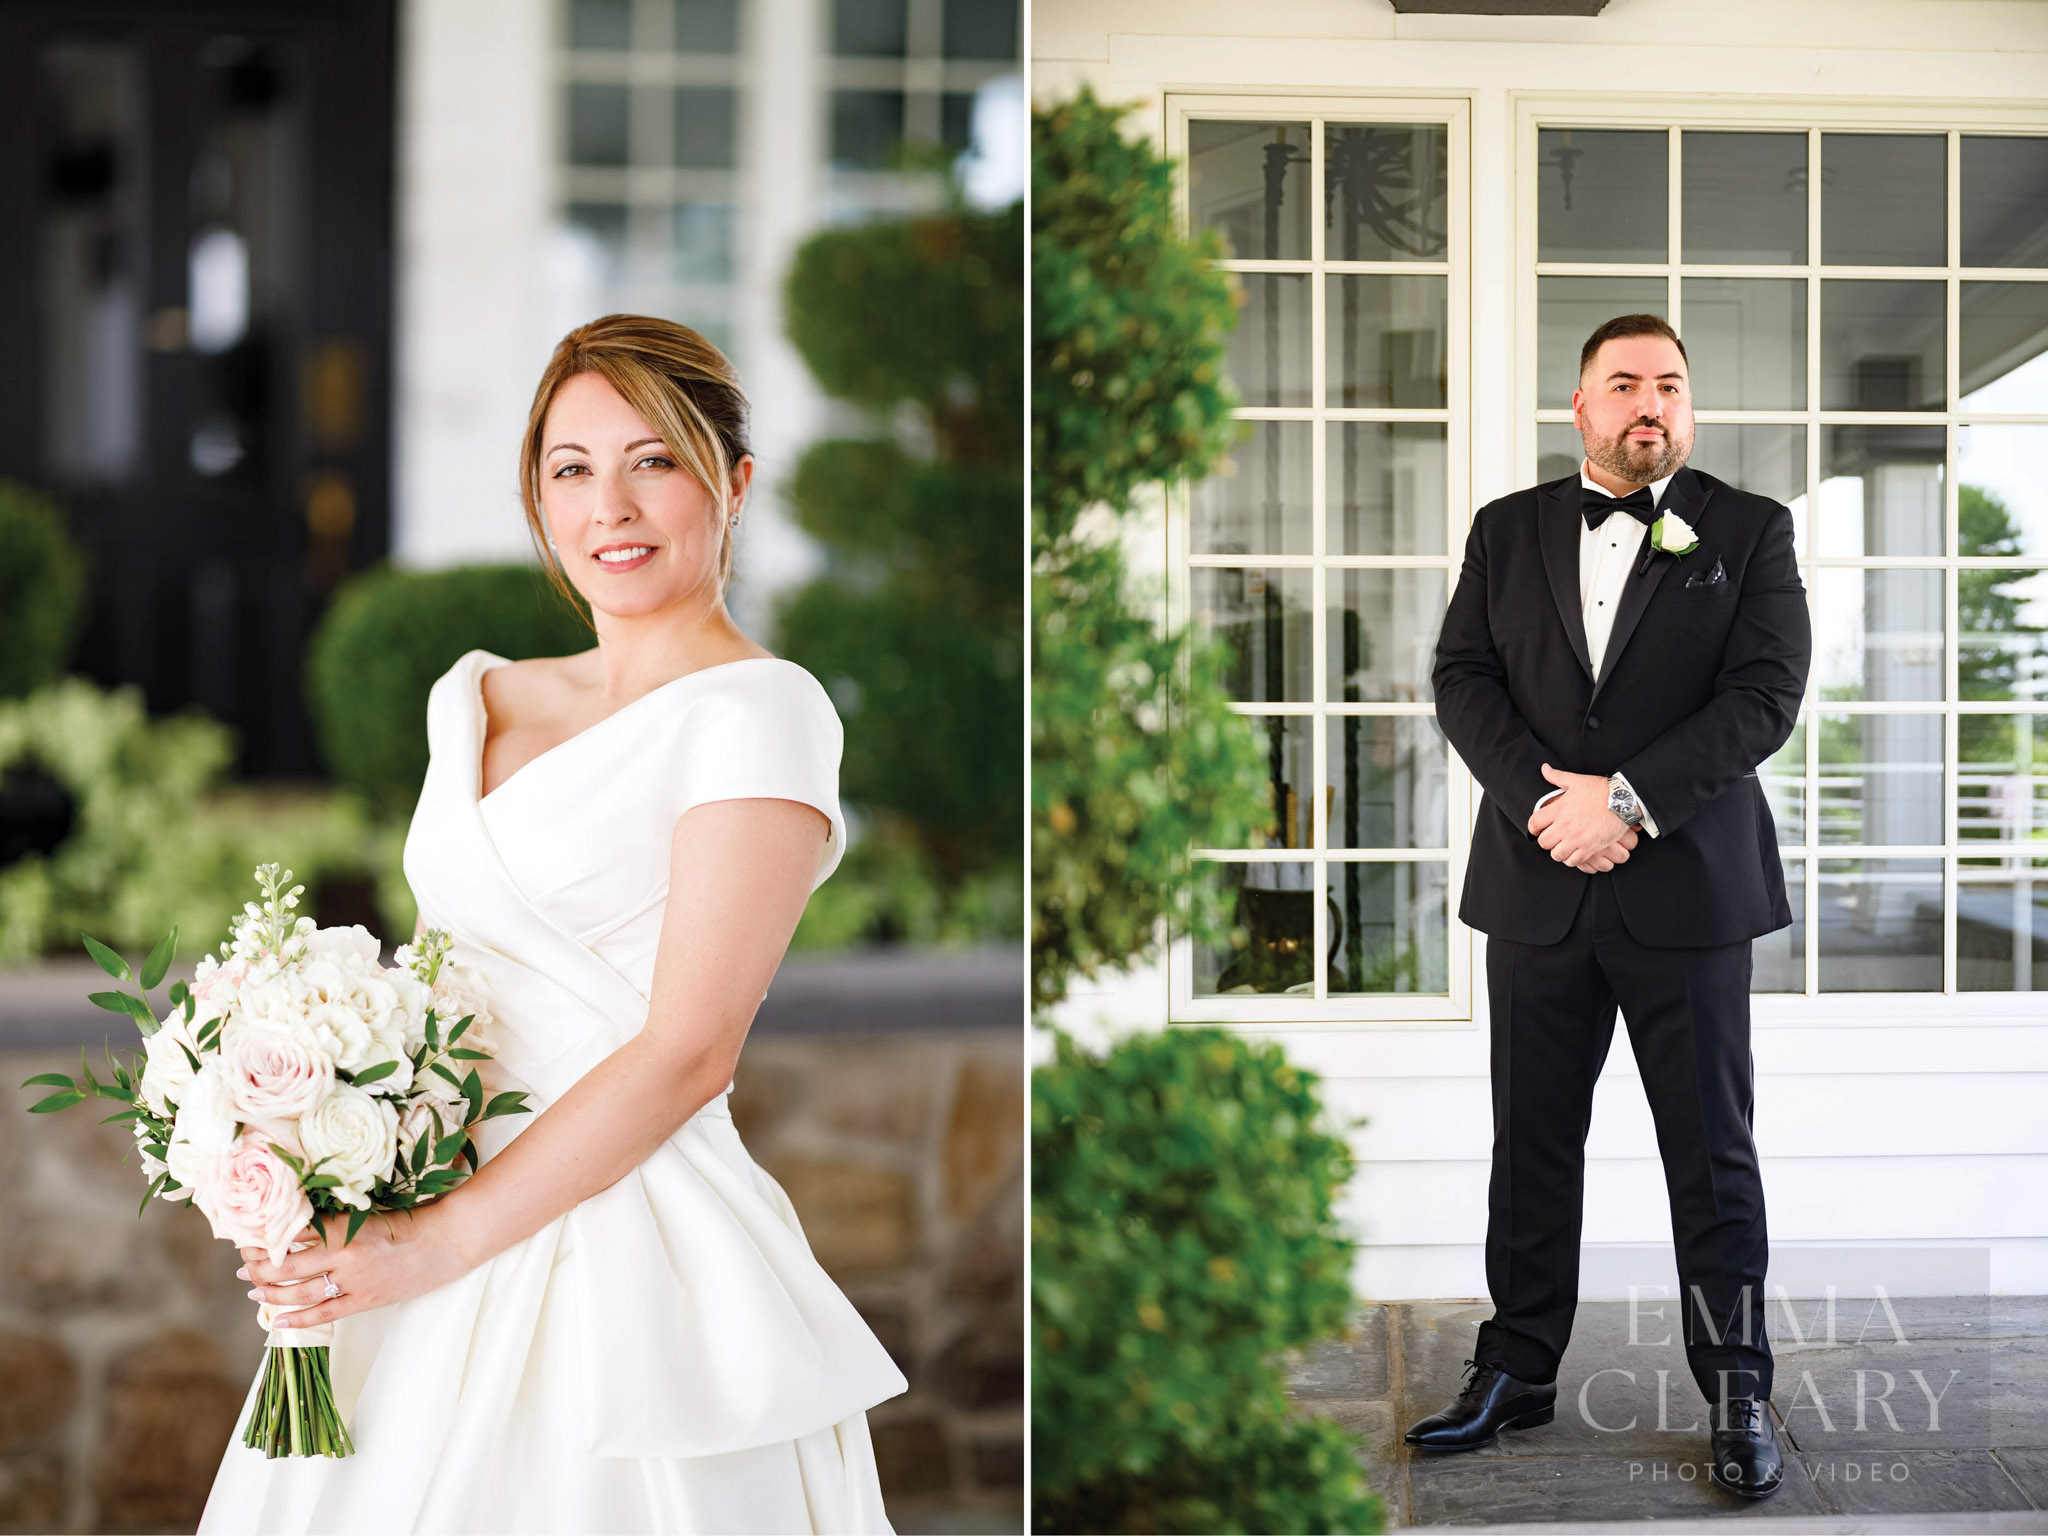 Portraits of the bride and groom